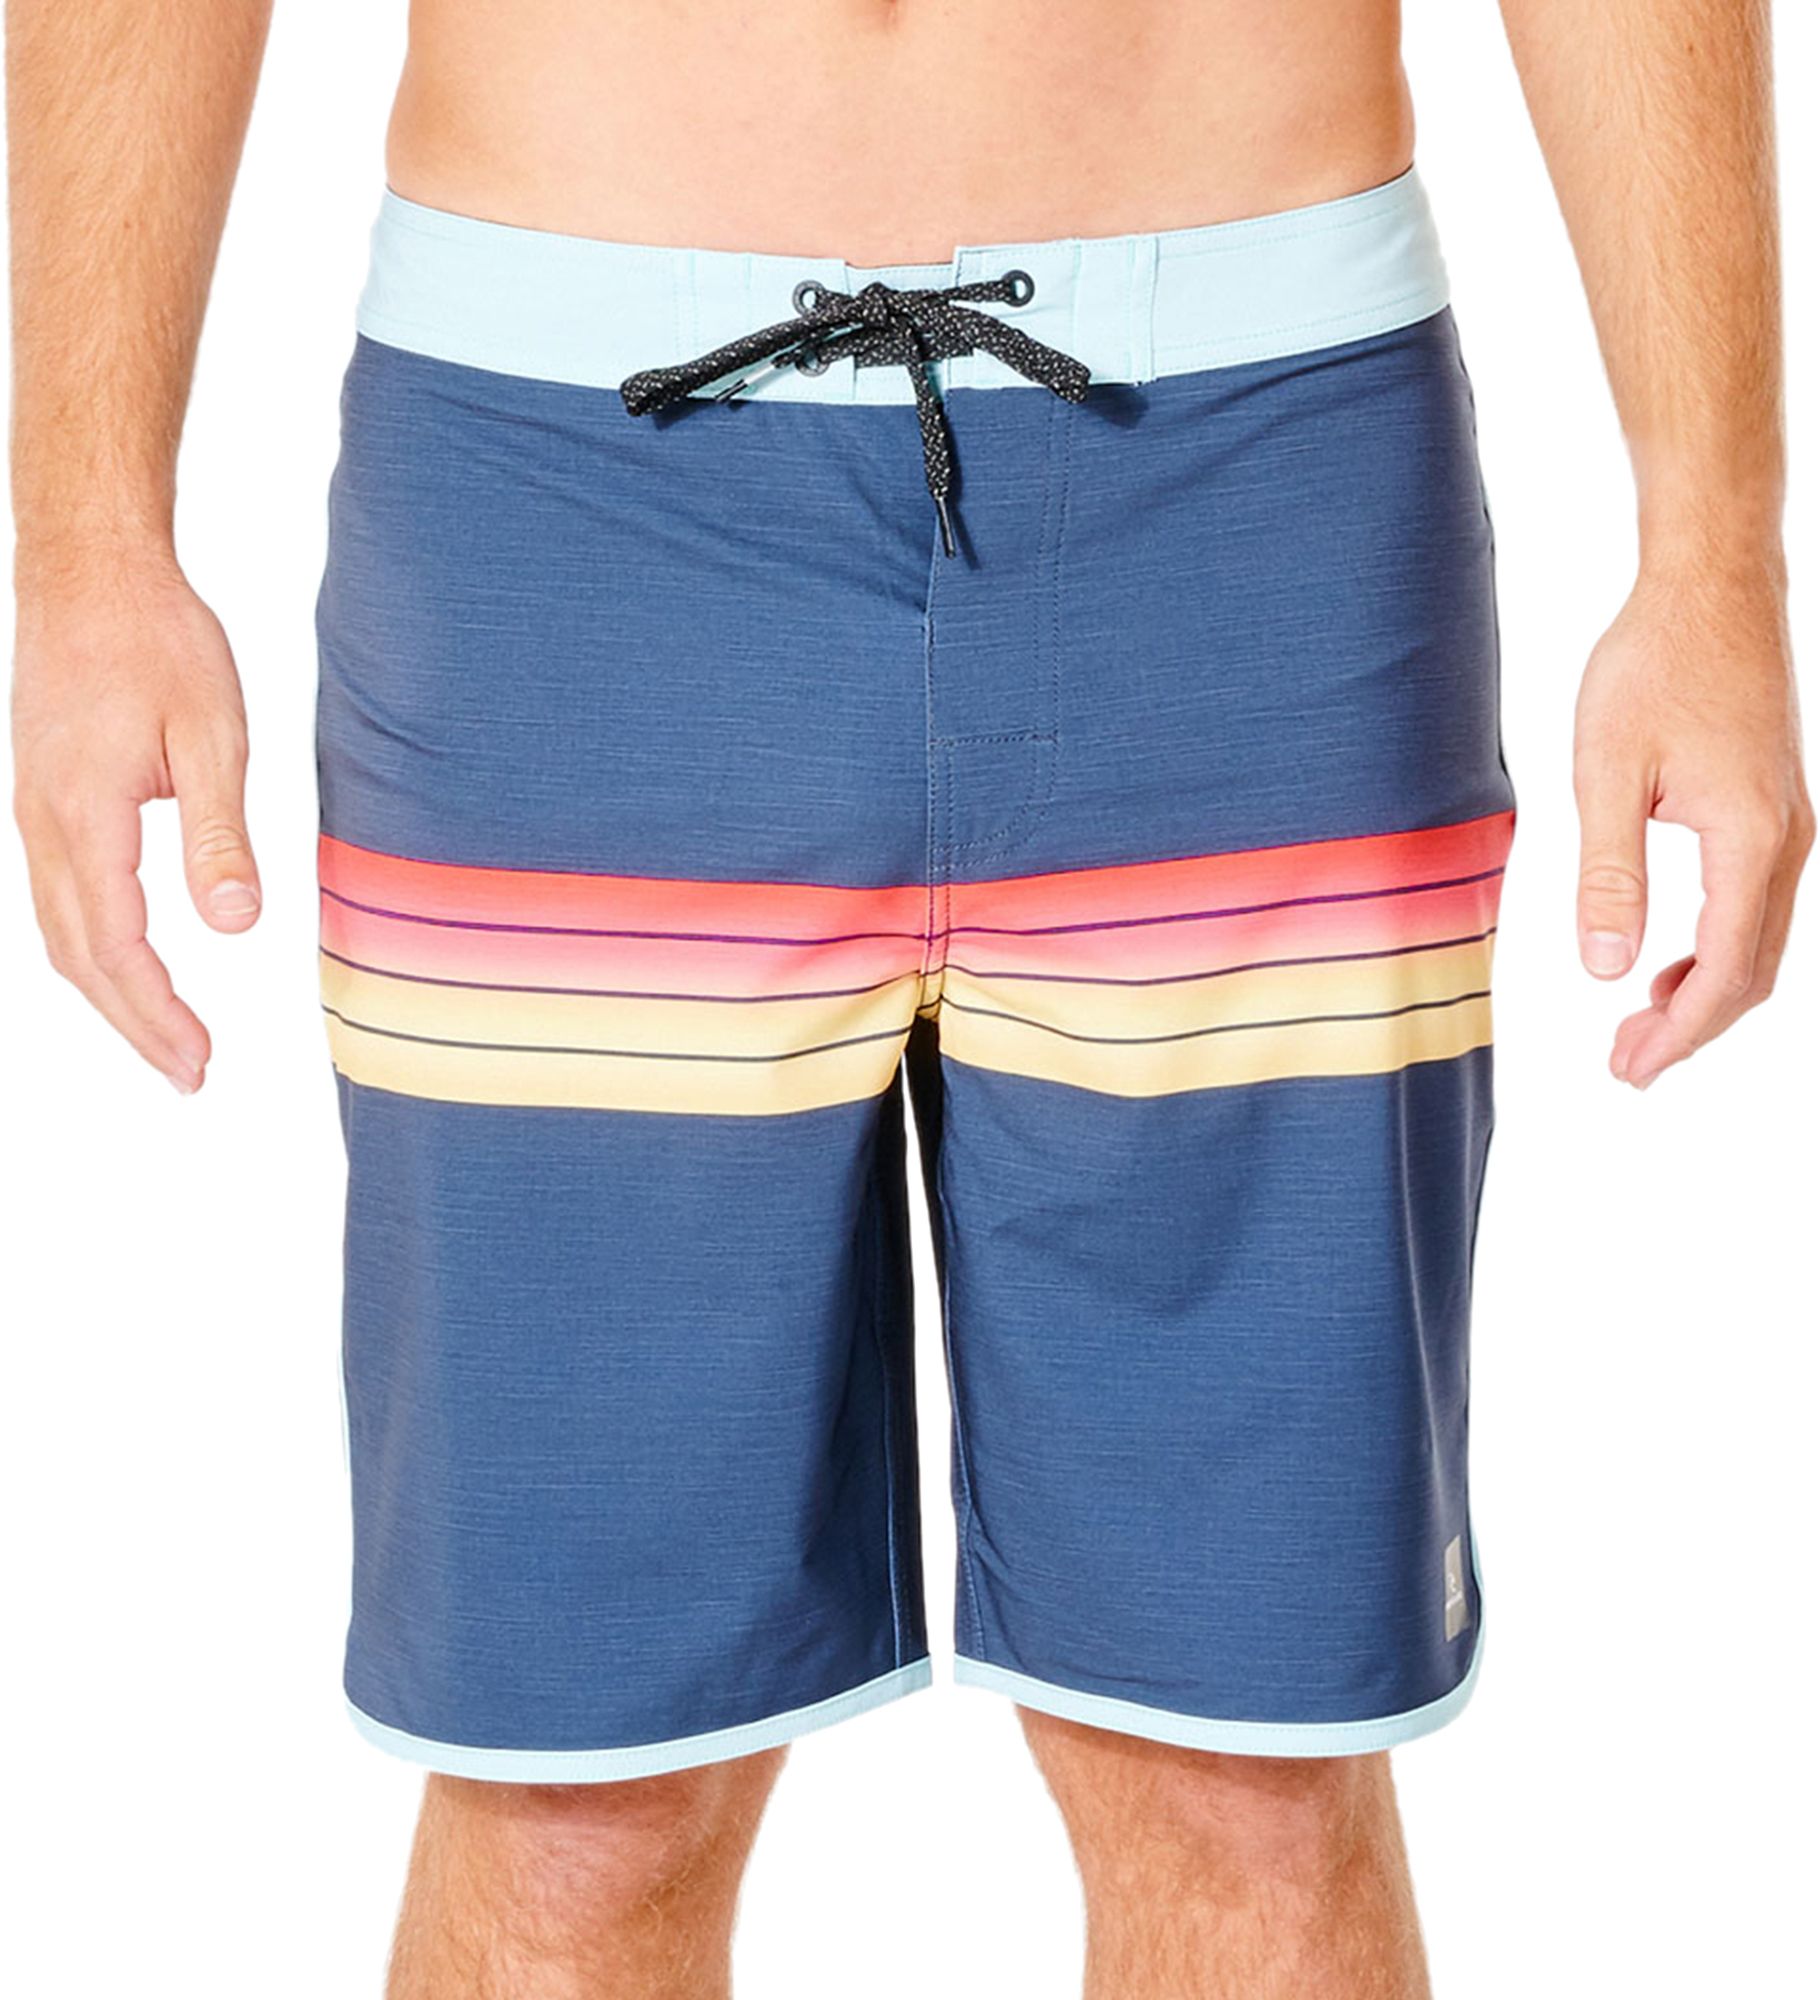 Photos - Swimwear Rip Curl Men's Mirage Surf Revival 19” Board Shorts, Size 34, Navy 21AW9MM 